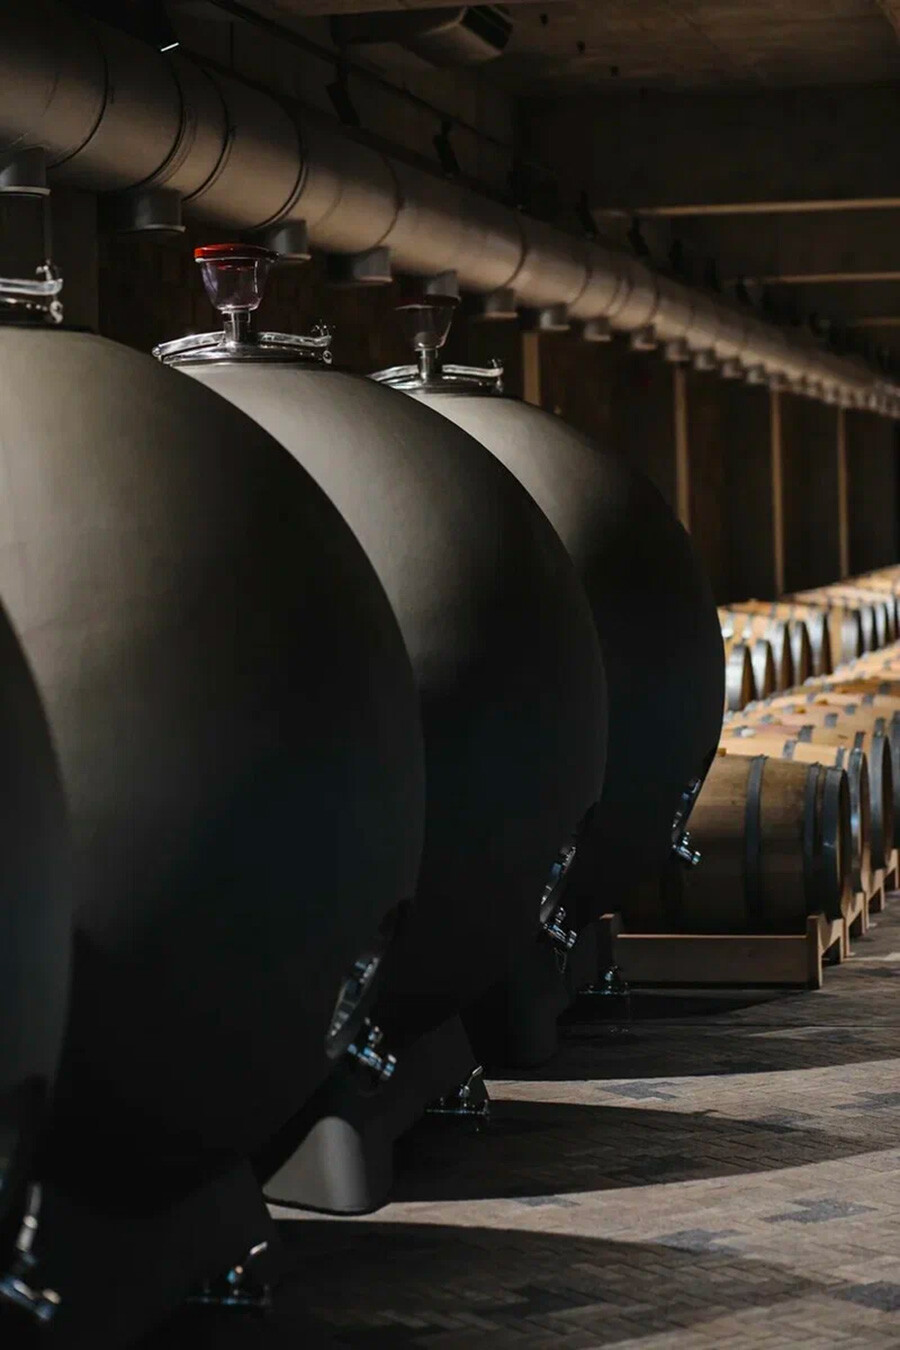 Concrete spheres help the wine proceed through the sediment mixing in a natural way.